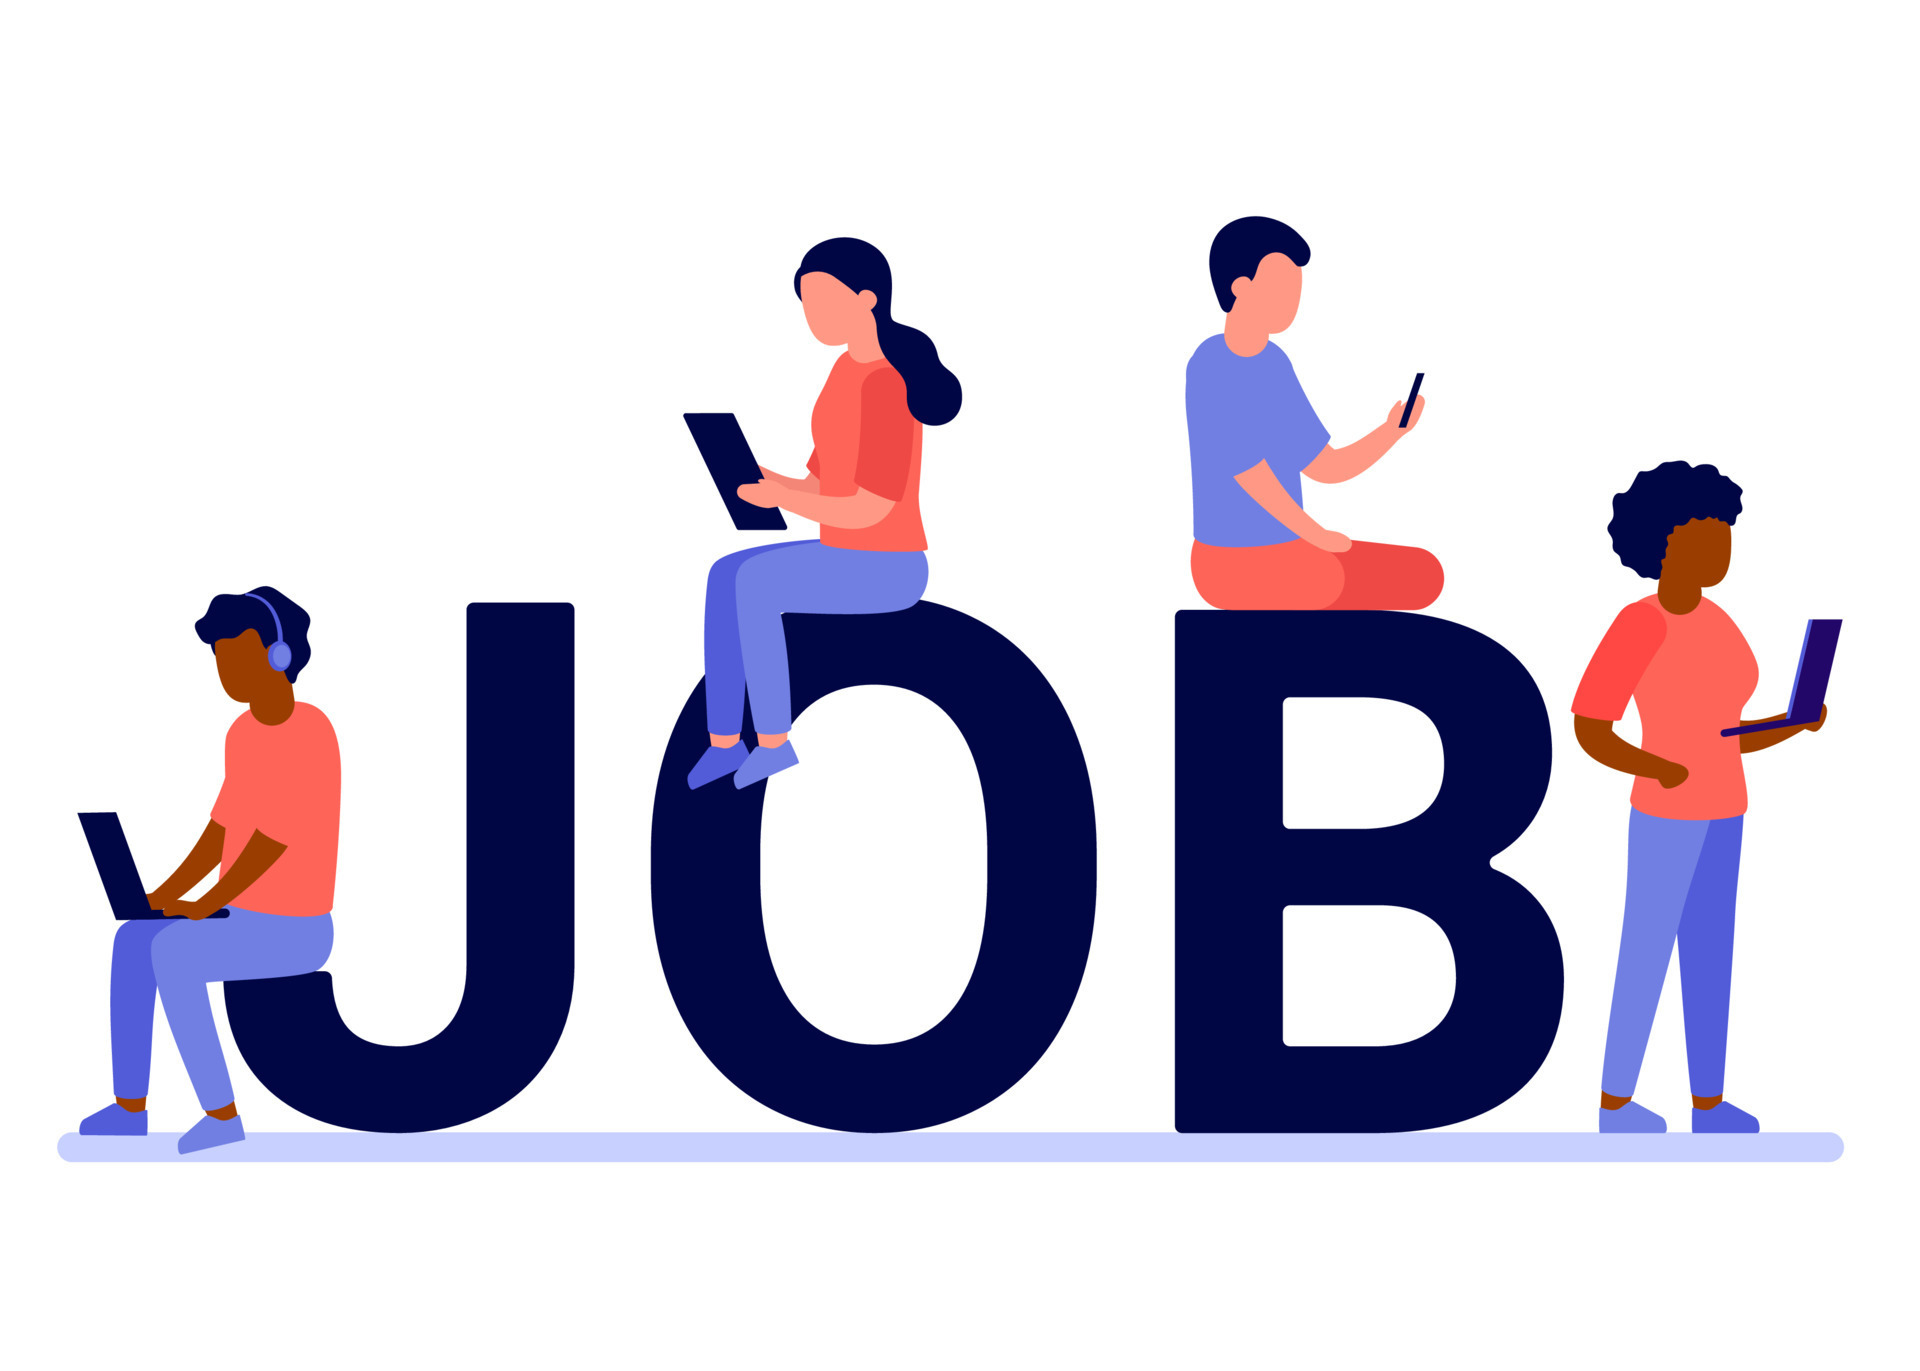 search-job-find-vacancy-employment-go-to-career-people-seek-opportunity-for-vacancy-or-work-position-search-new-work-in-internet-illustration-vector